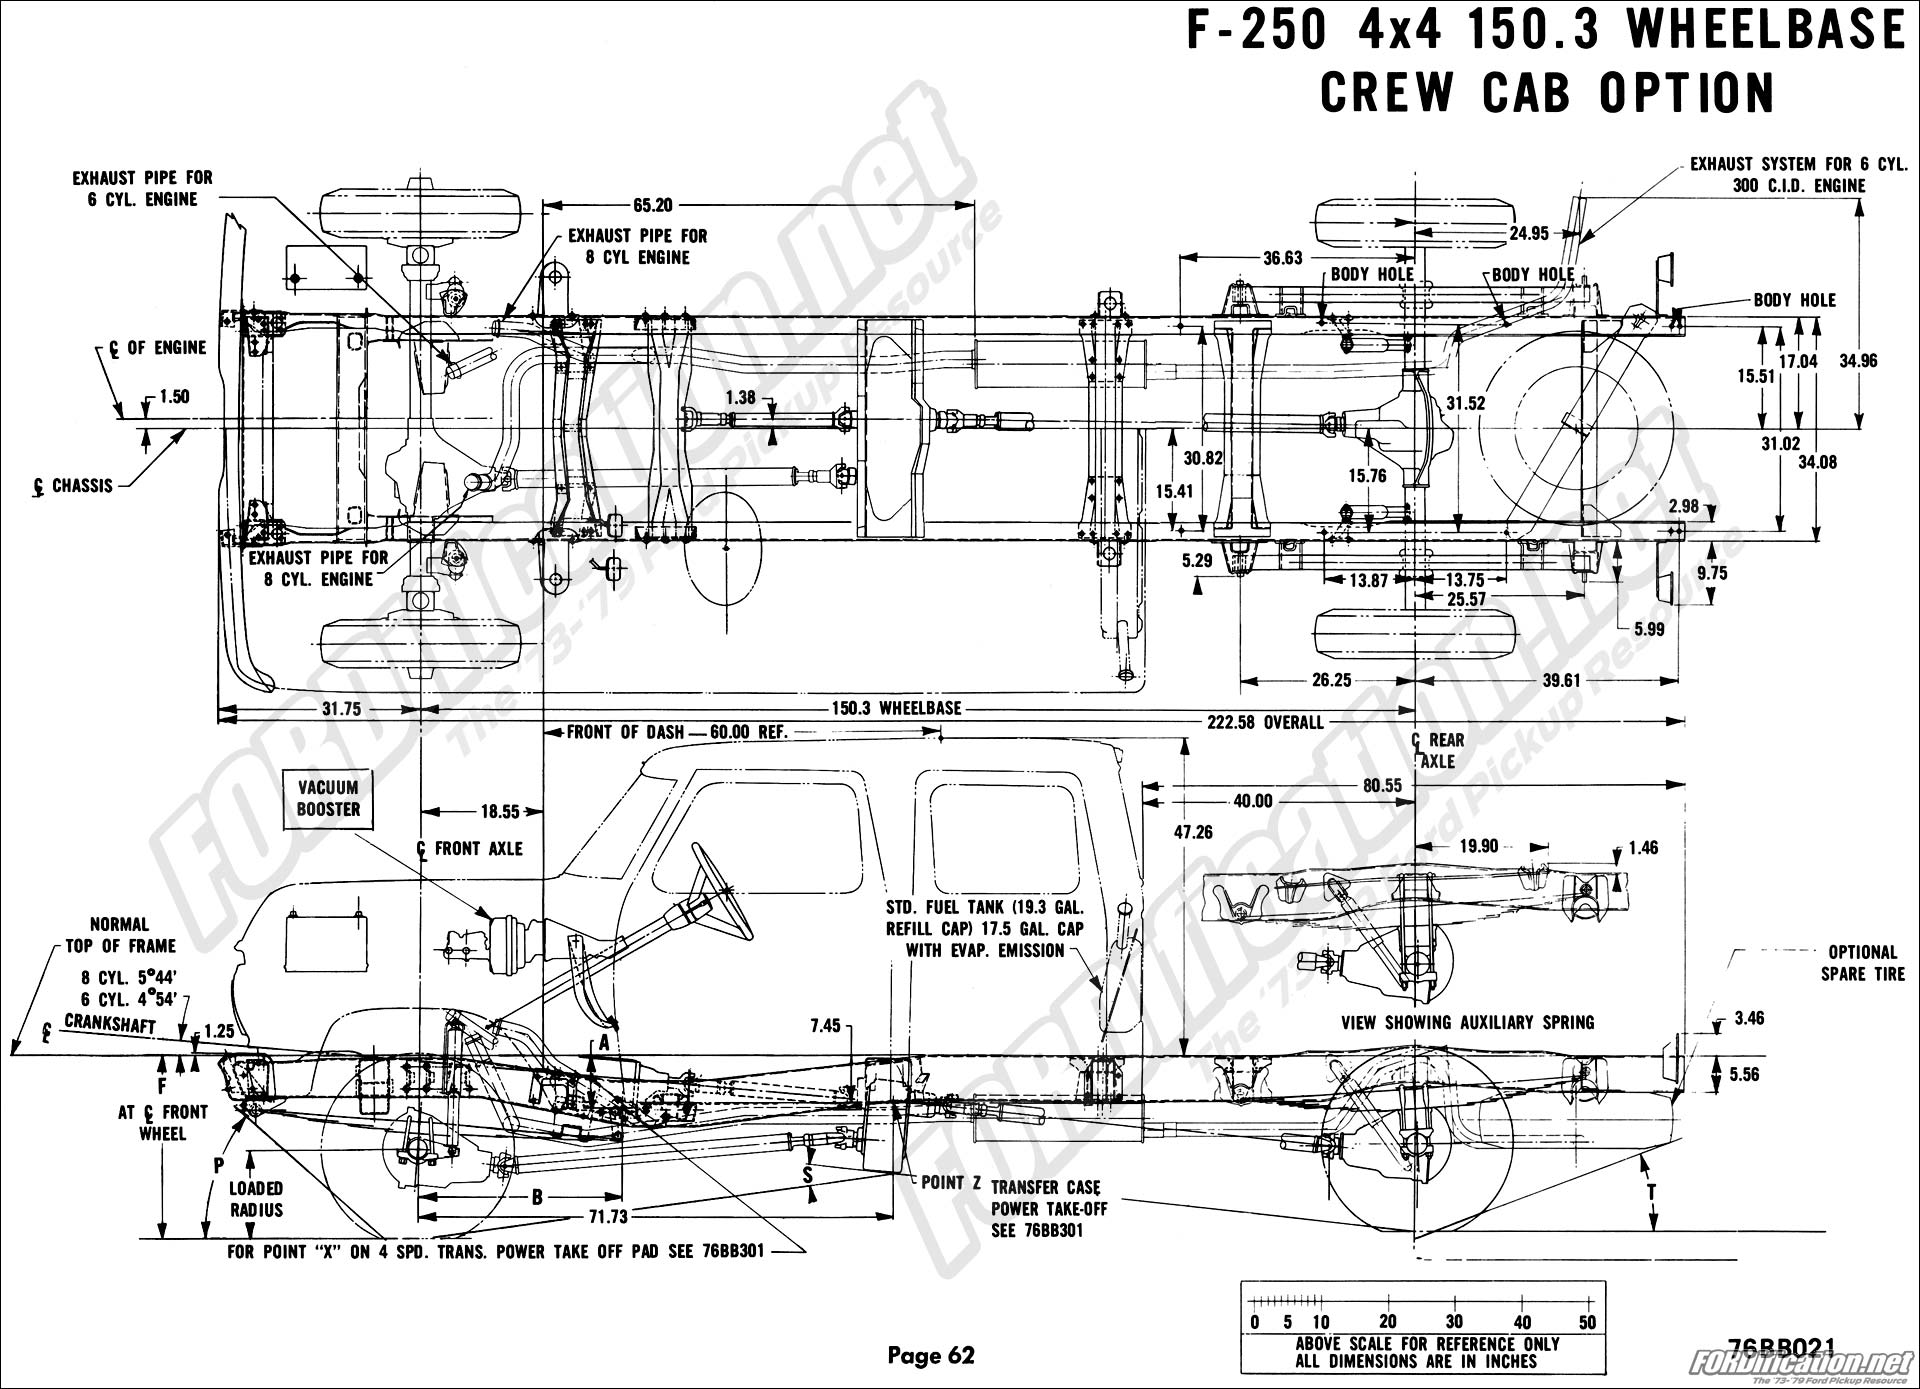 1979 Ford truck frame dimensions